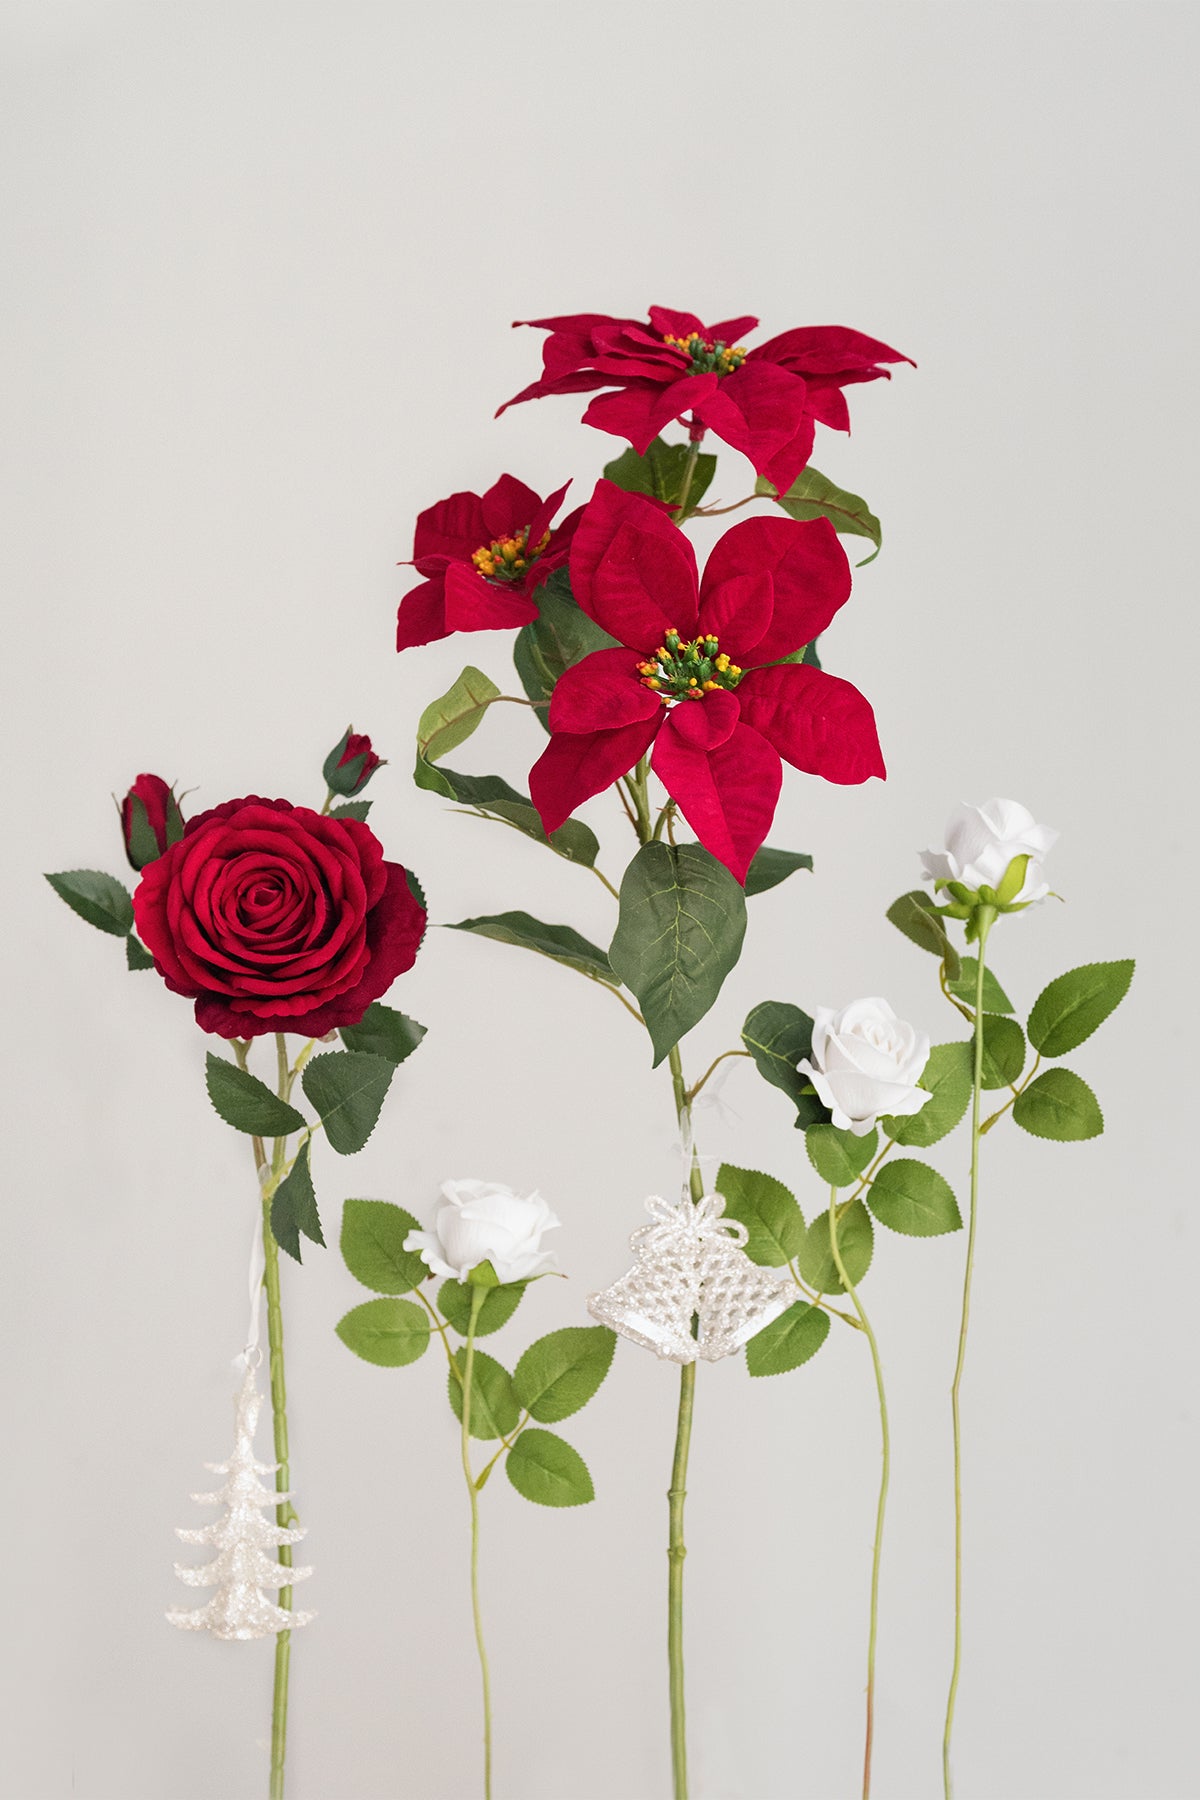 DIY Supporting Flower Boxes in Christmas Red & Sparkle